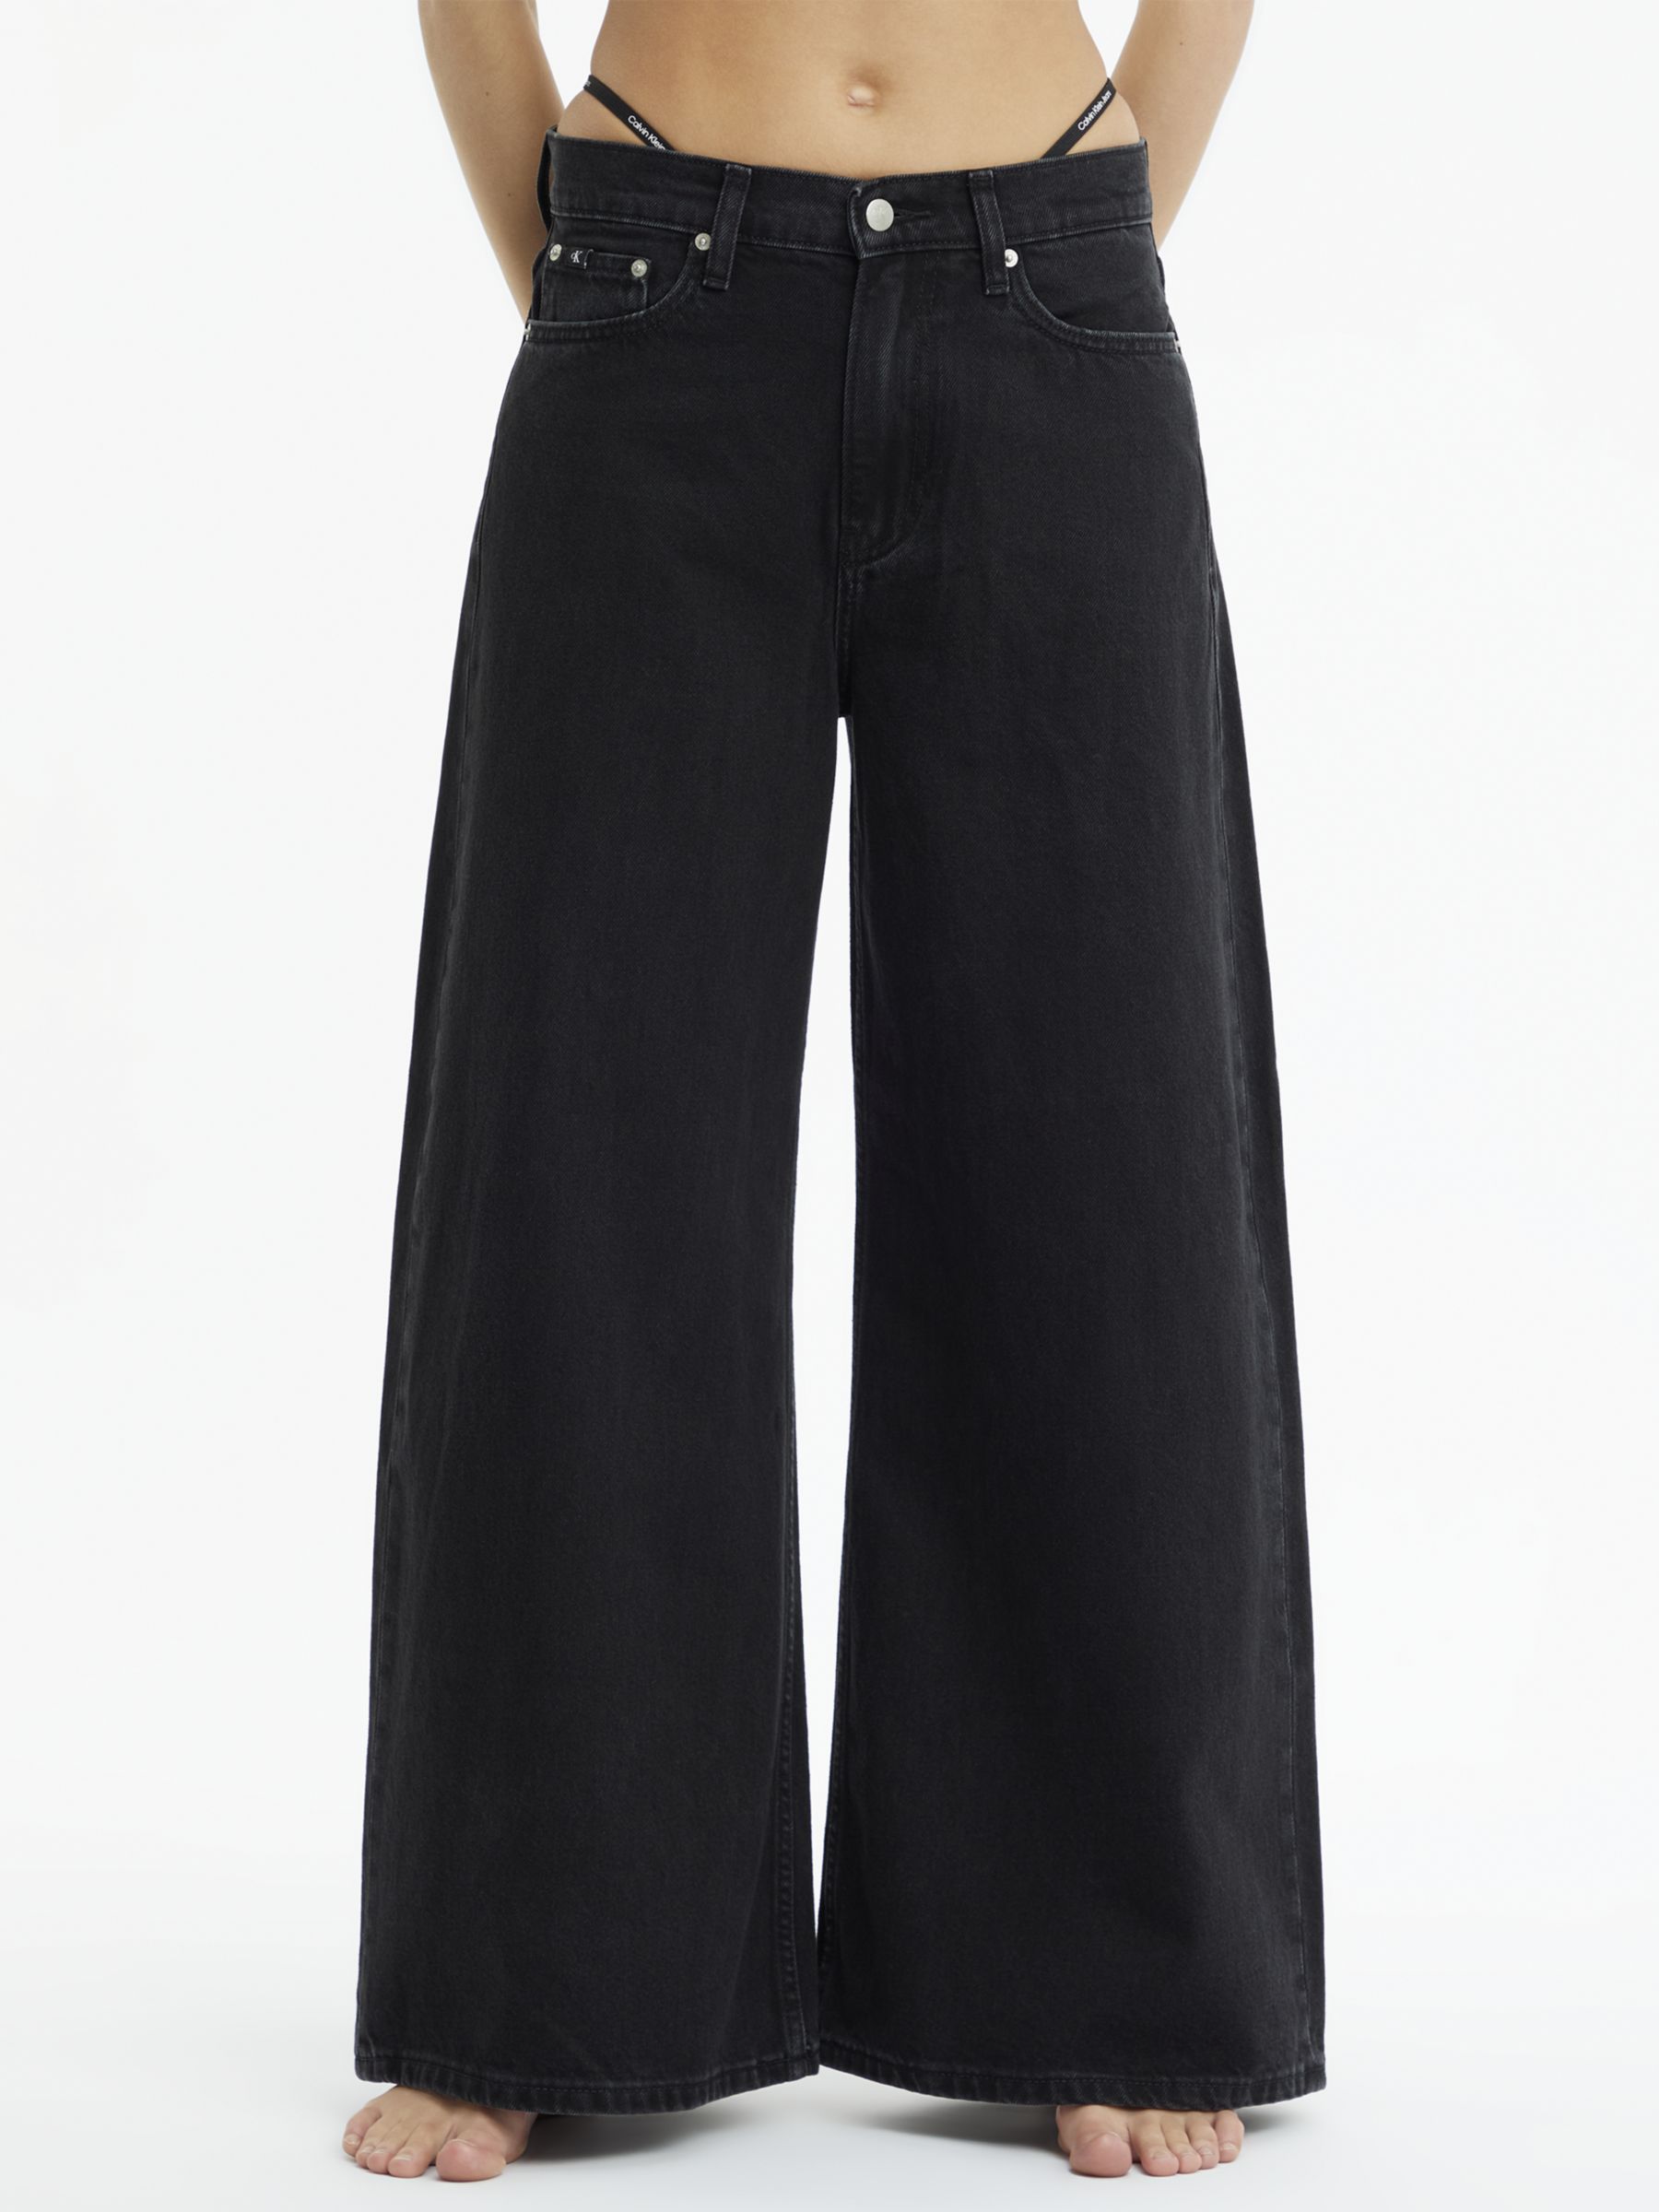 Calvin Klein Low Rise Relaxed Jeans, Black, 30R